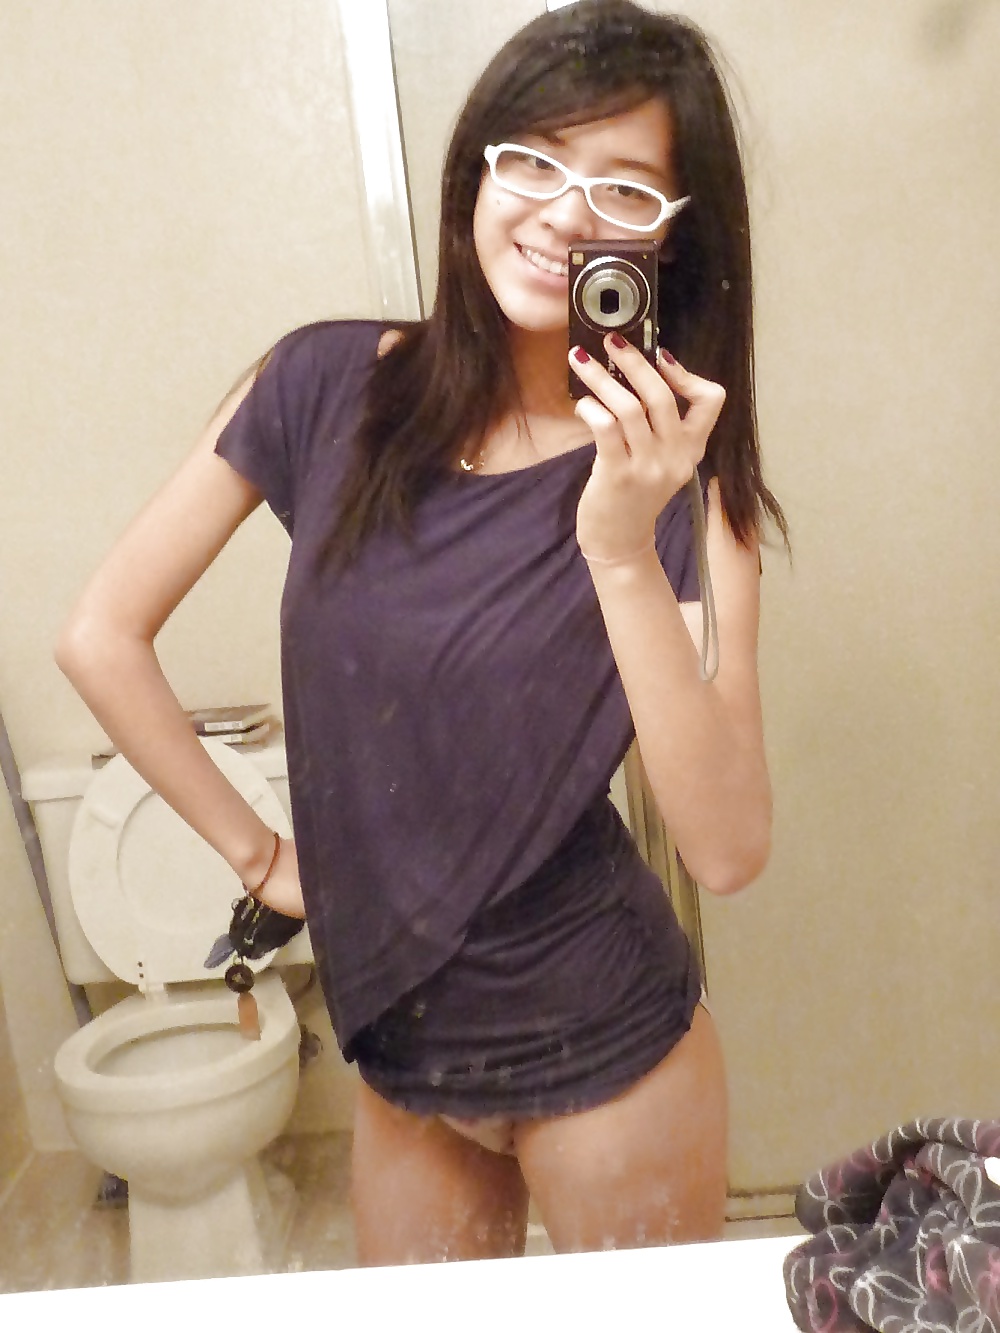 See and Save As nude asian girl with glasses sexy porn pict - 4crot.com